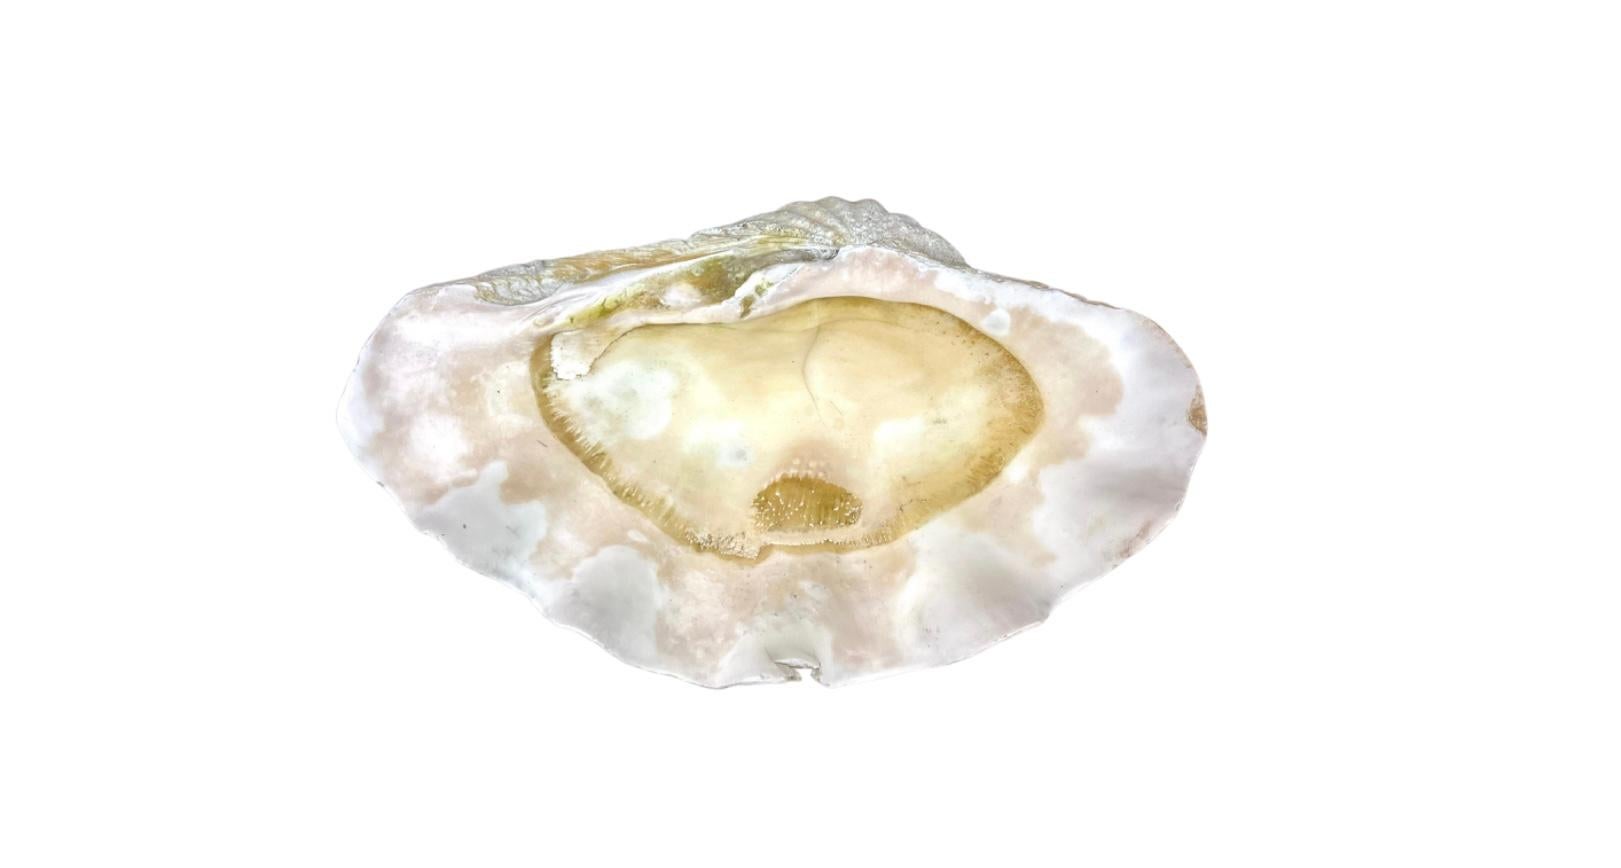 Authentic large clam shell specimen with its iconic sculptural form and sea inspired colors and textures. Measure: 16.5 inch.